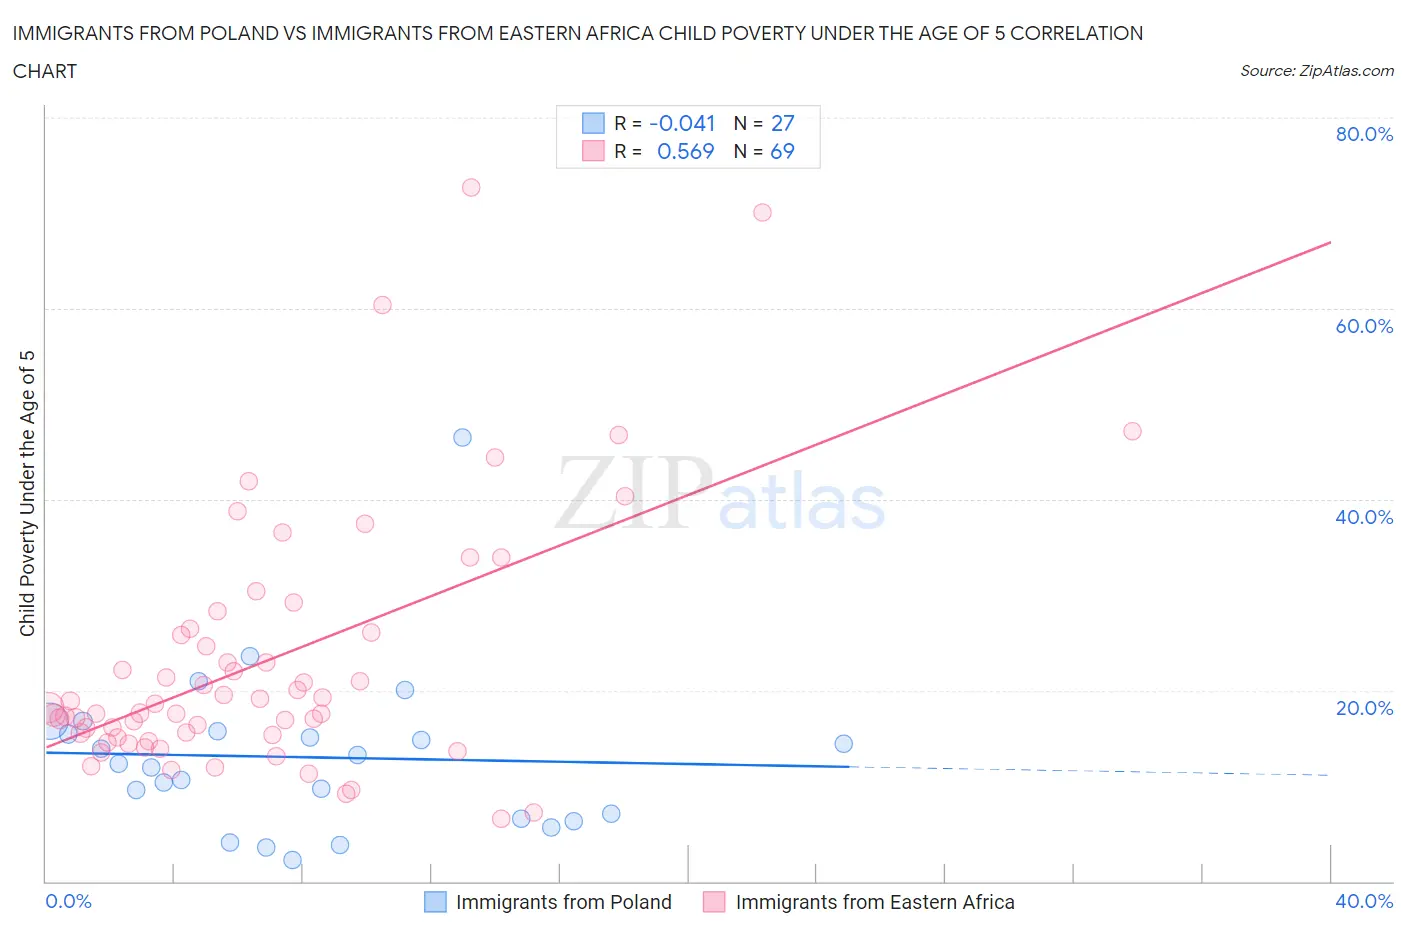 Immigrants from Poland vs Immigrants from Eastern Africa Child Poverty Under the Age of 5